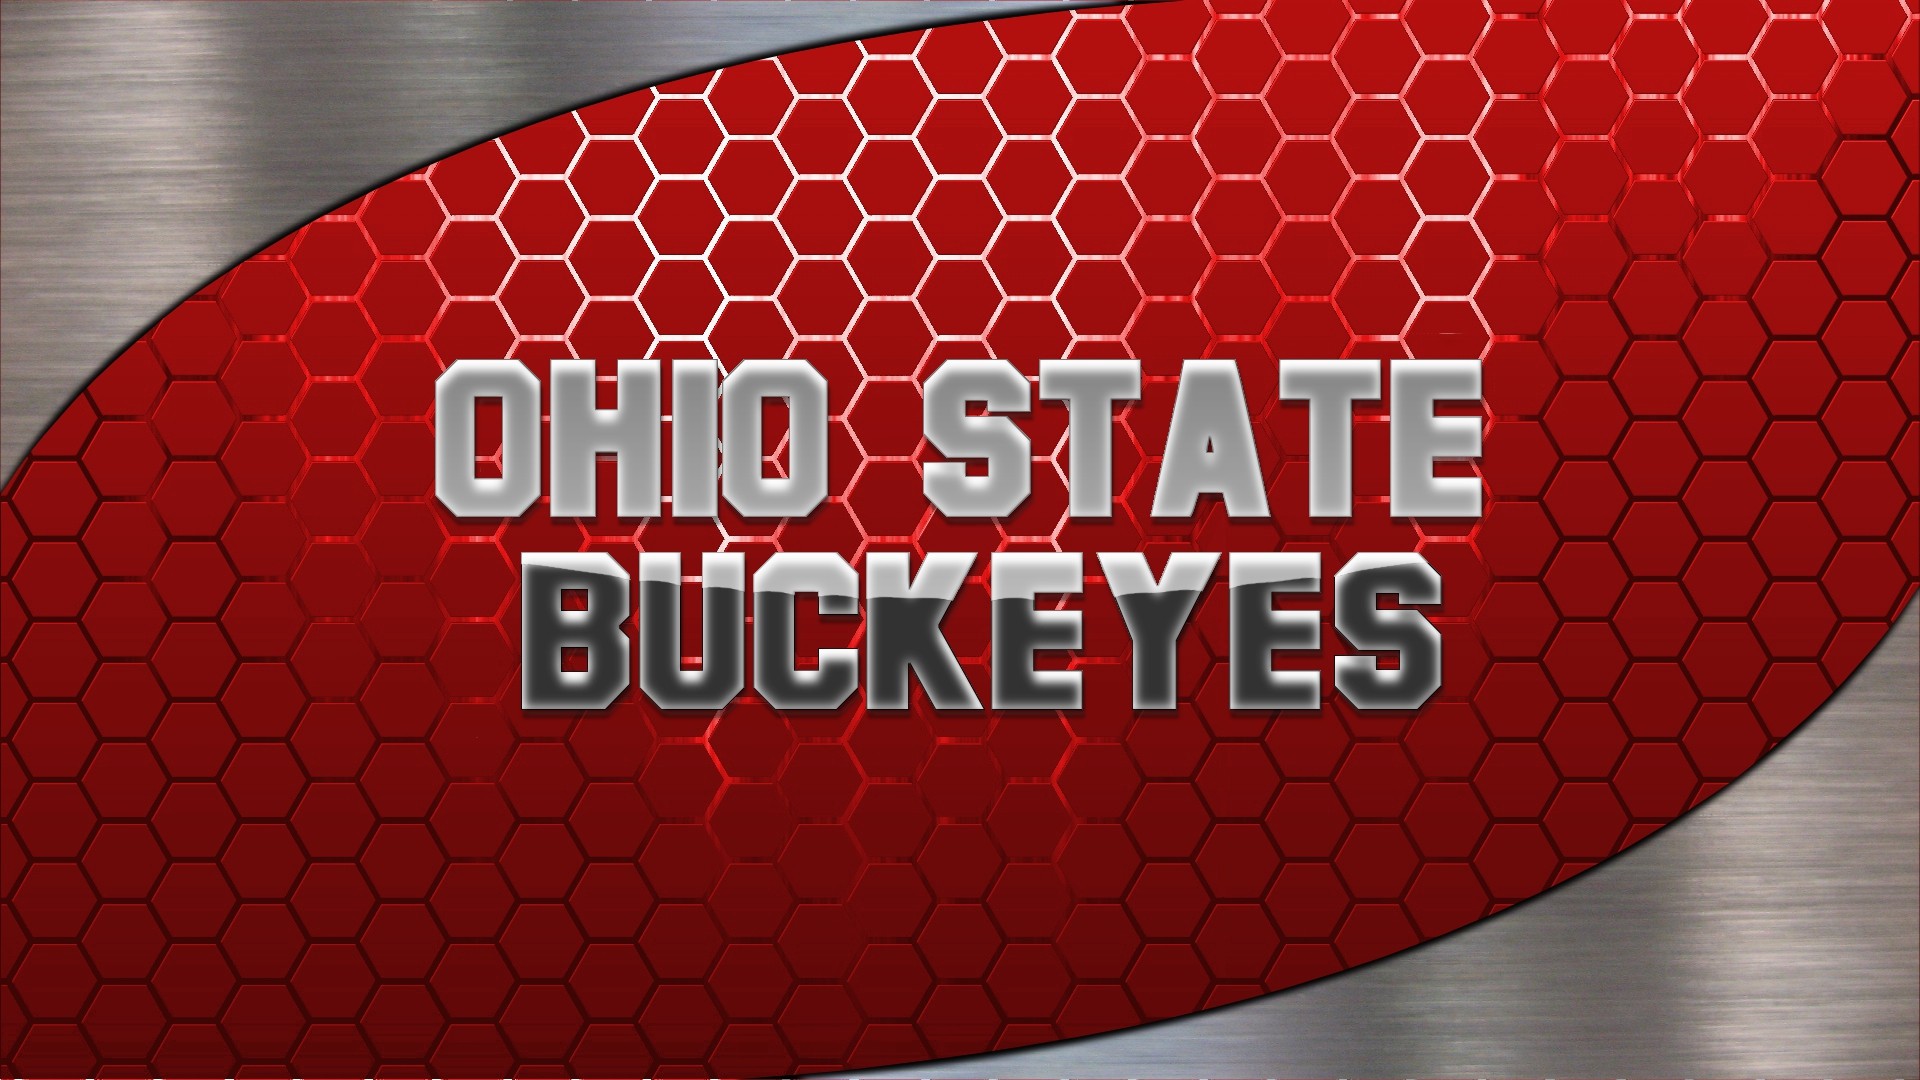 Free download Ohio State Buckeyes Wallpaper HD HD Wallpapers High